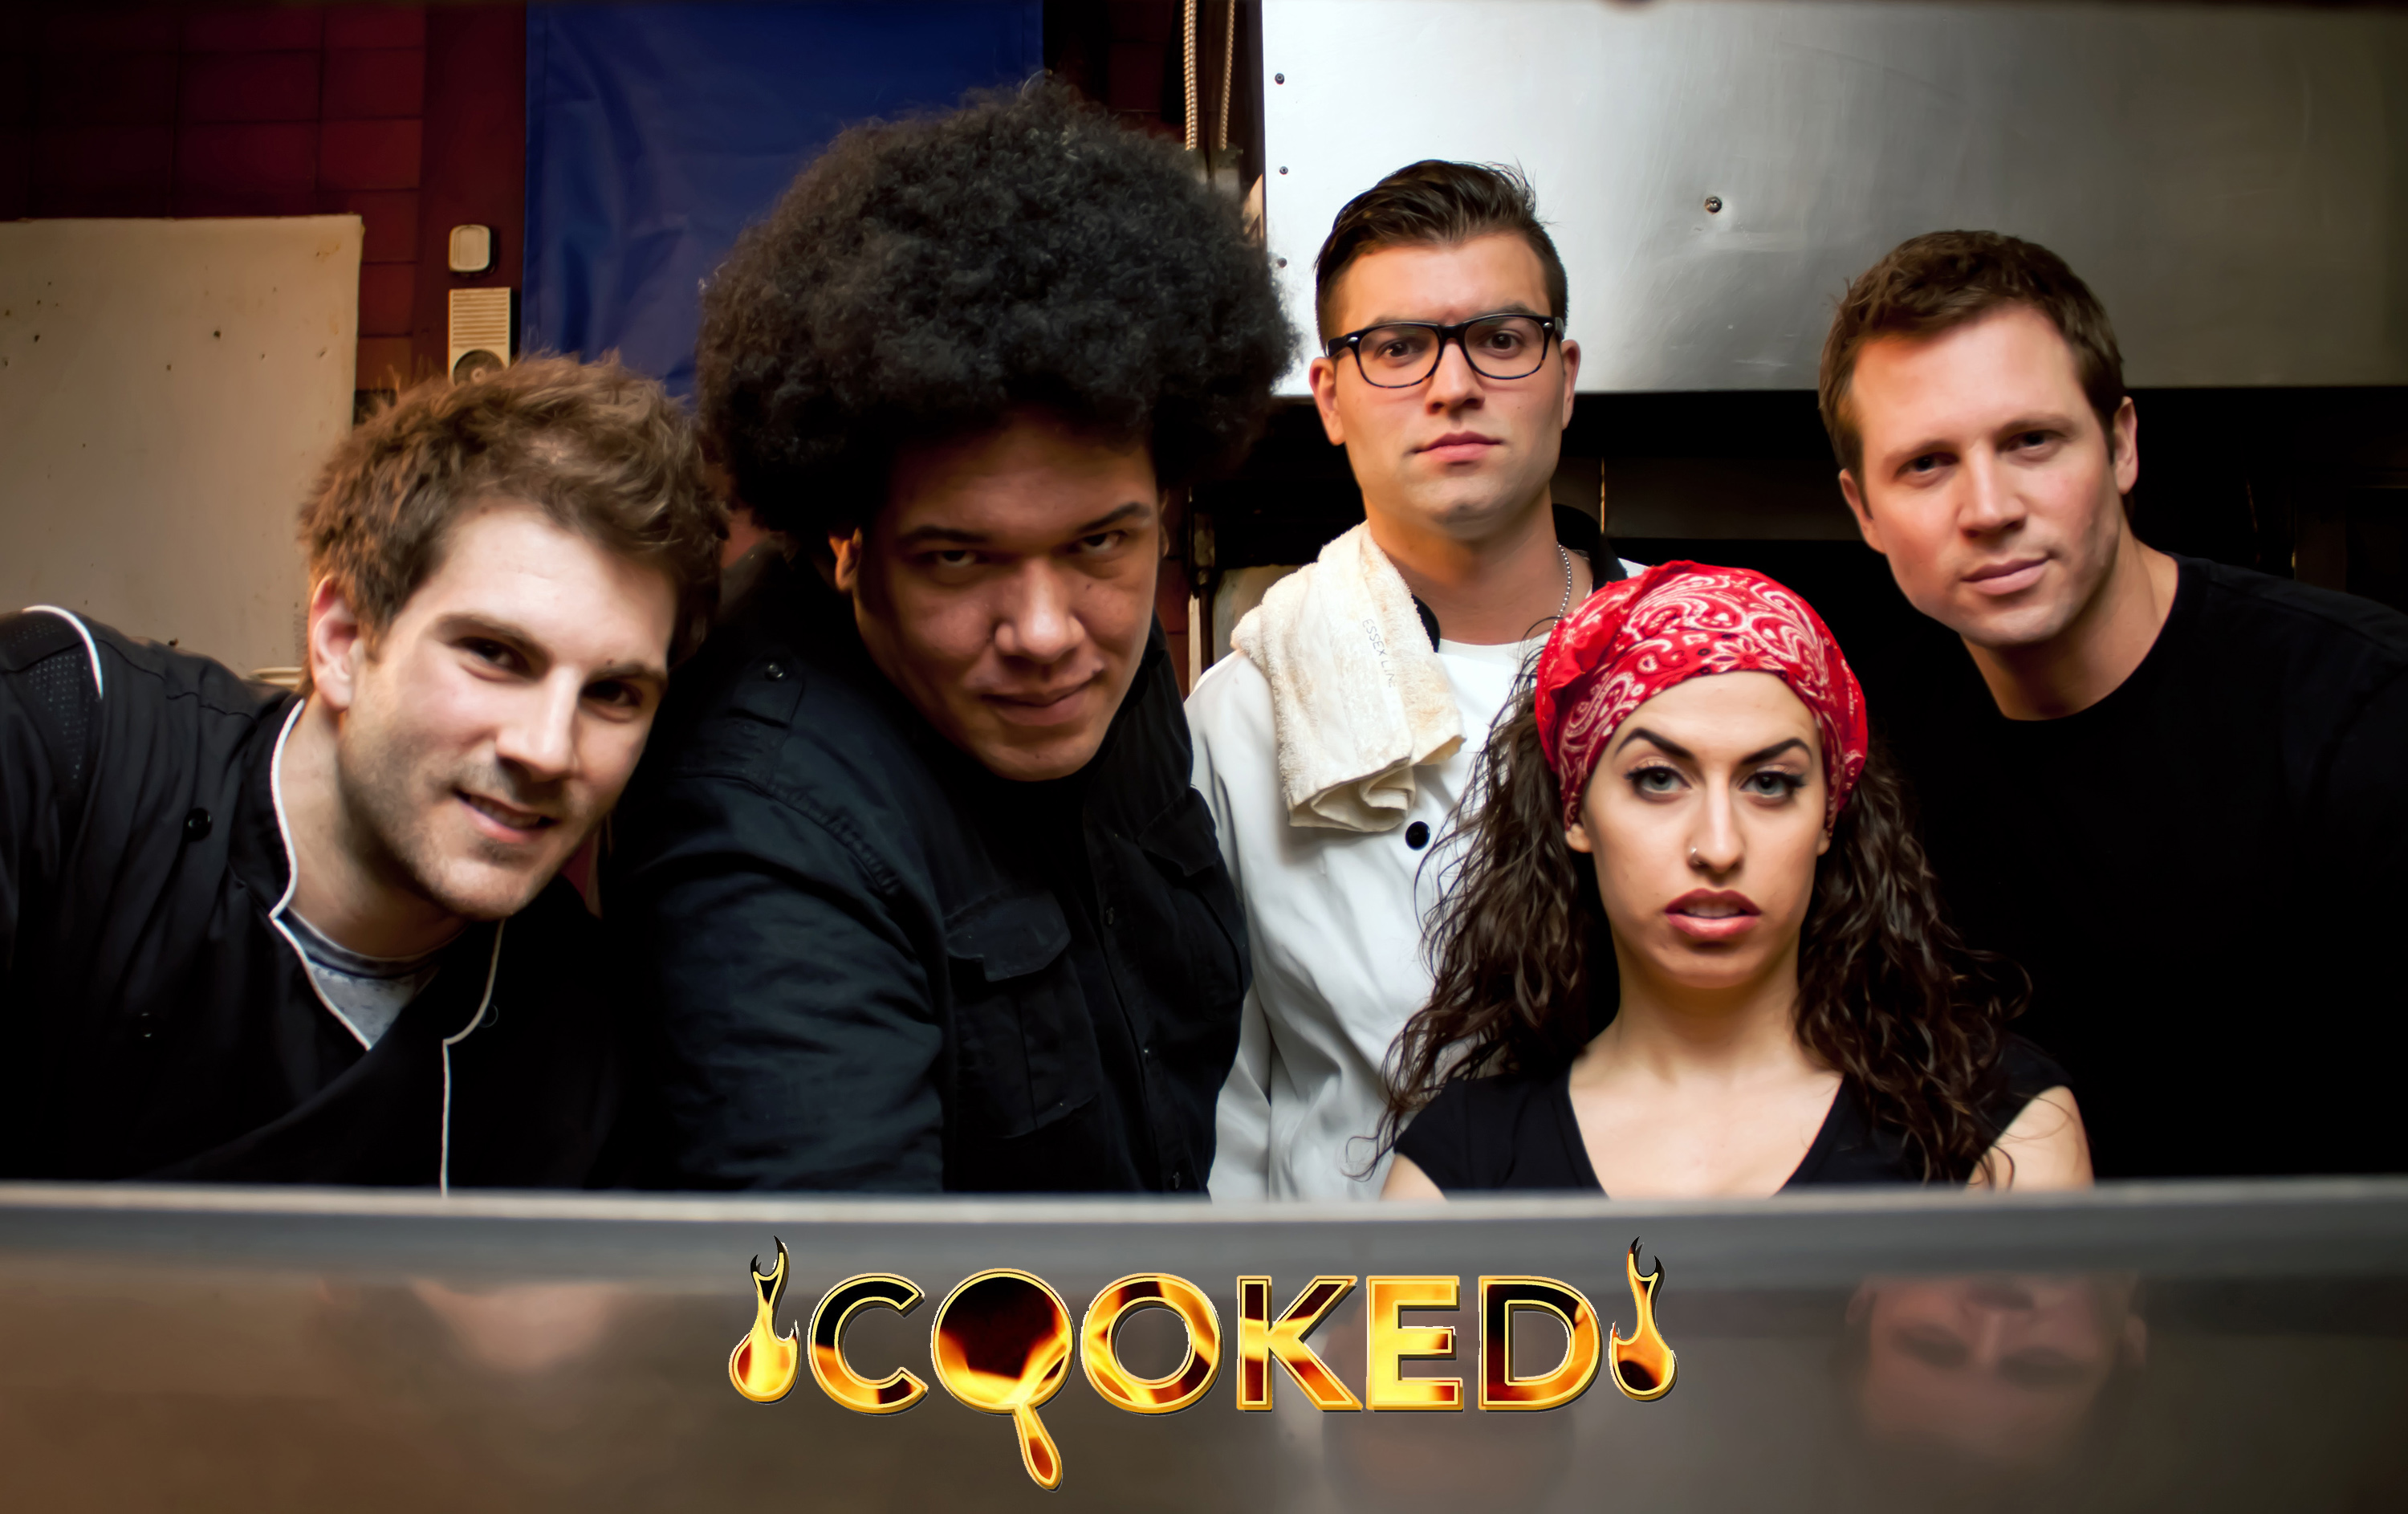 Dave, Pope, Alec, Carmen, and Patrick - the kitchen staff of COOKED!